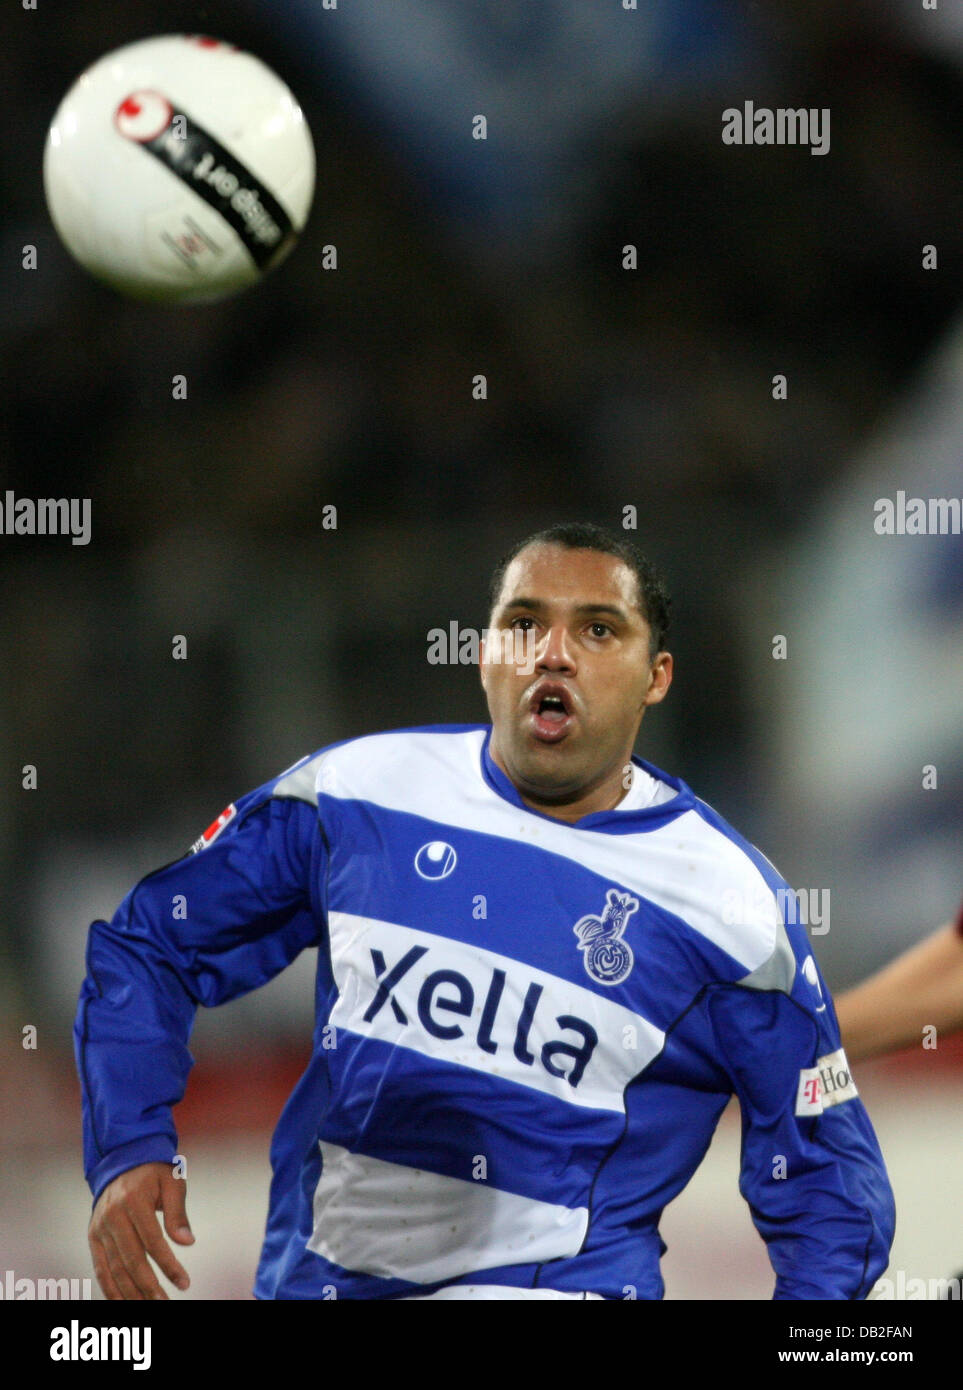 Ailton of Duisburg stops the ball during the Bundesliga match MSV Duisburg v 1.FC Nuremberg at MSV Arena stadium of Duisburg, Germany, 02 December 2007. Diosburg won the match 1-0. Photo: Roland Weihrauch Stock Photo